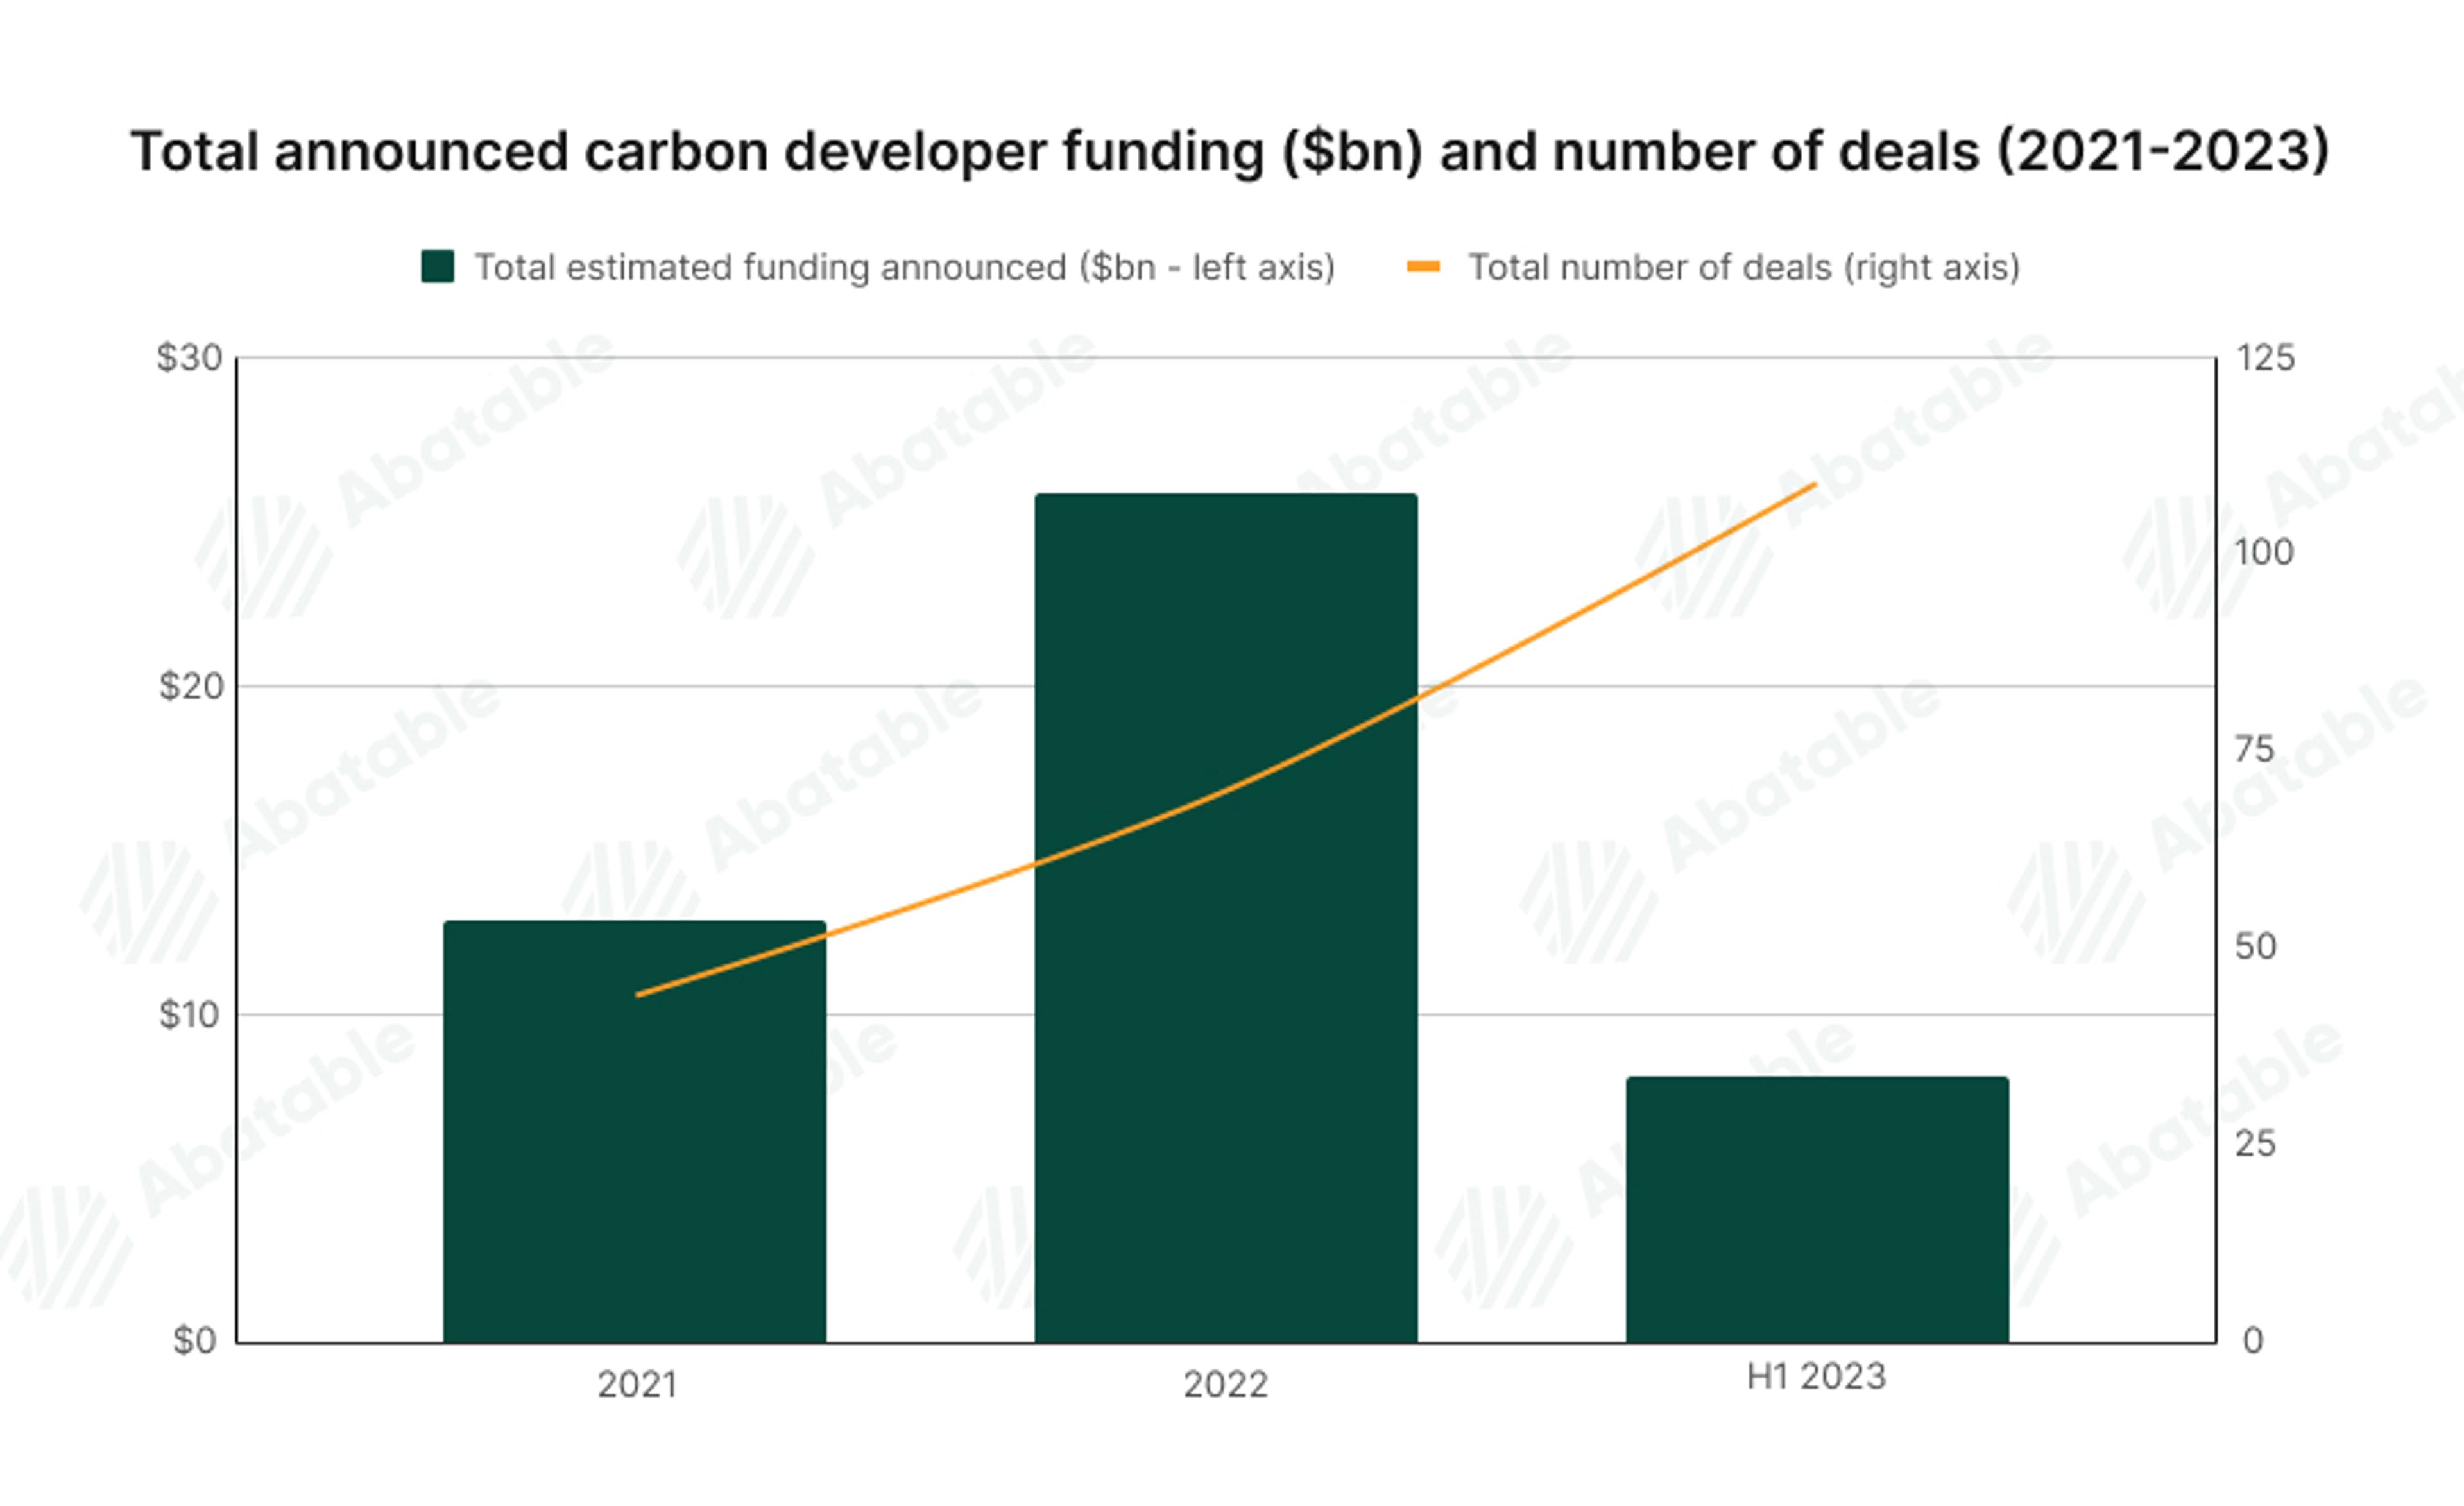 Graphic showing the total announced carbon developer funding and number of deals from 2021 to 2023